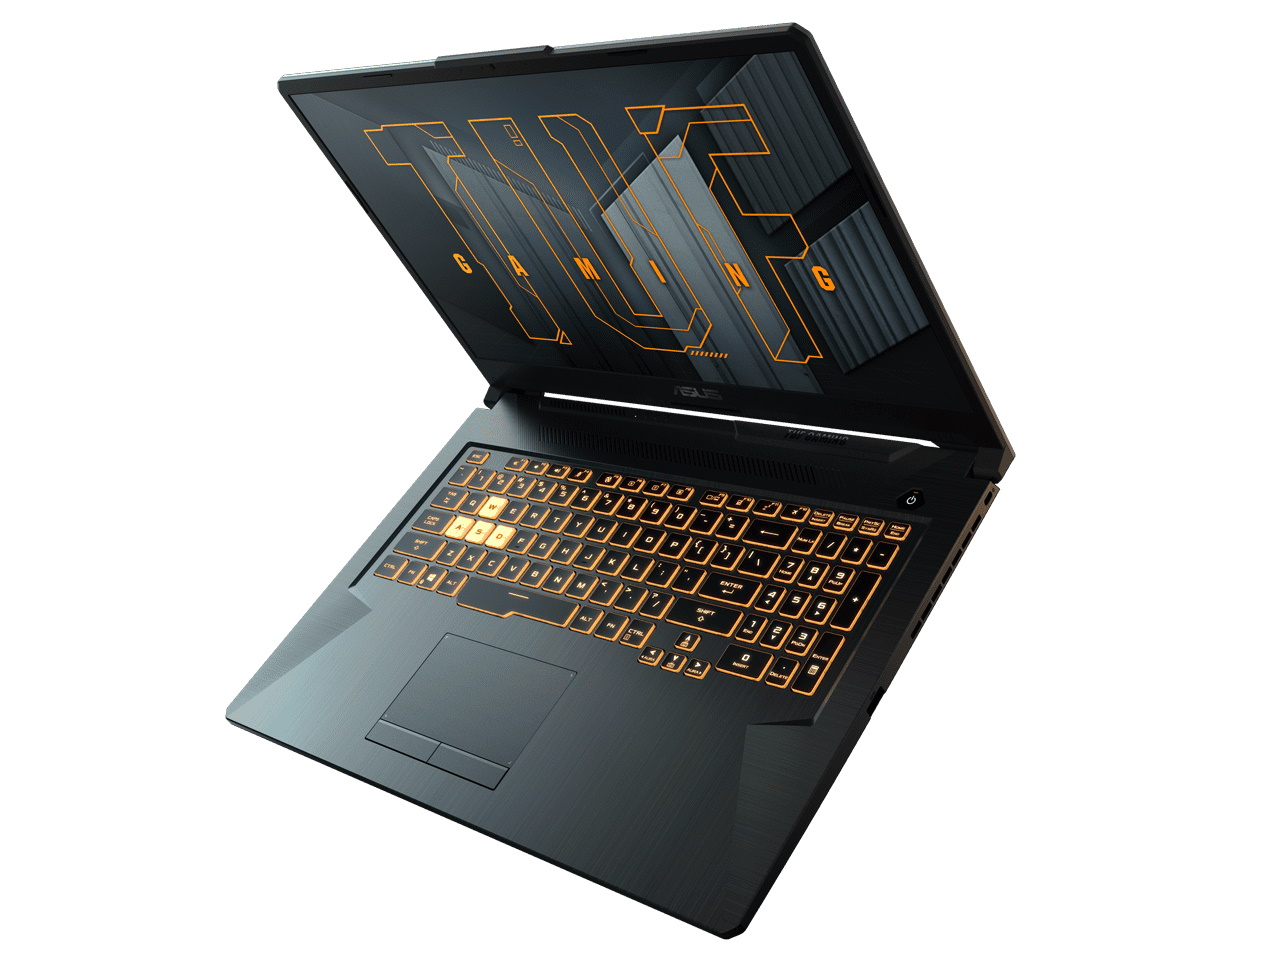 Asus TUF Gaming F17 laptop review: Good gaming device with RTX